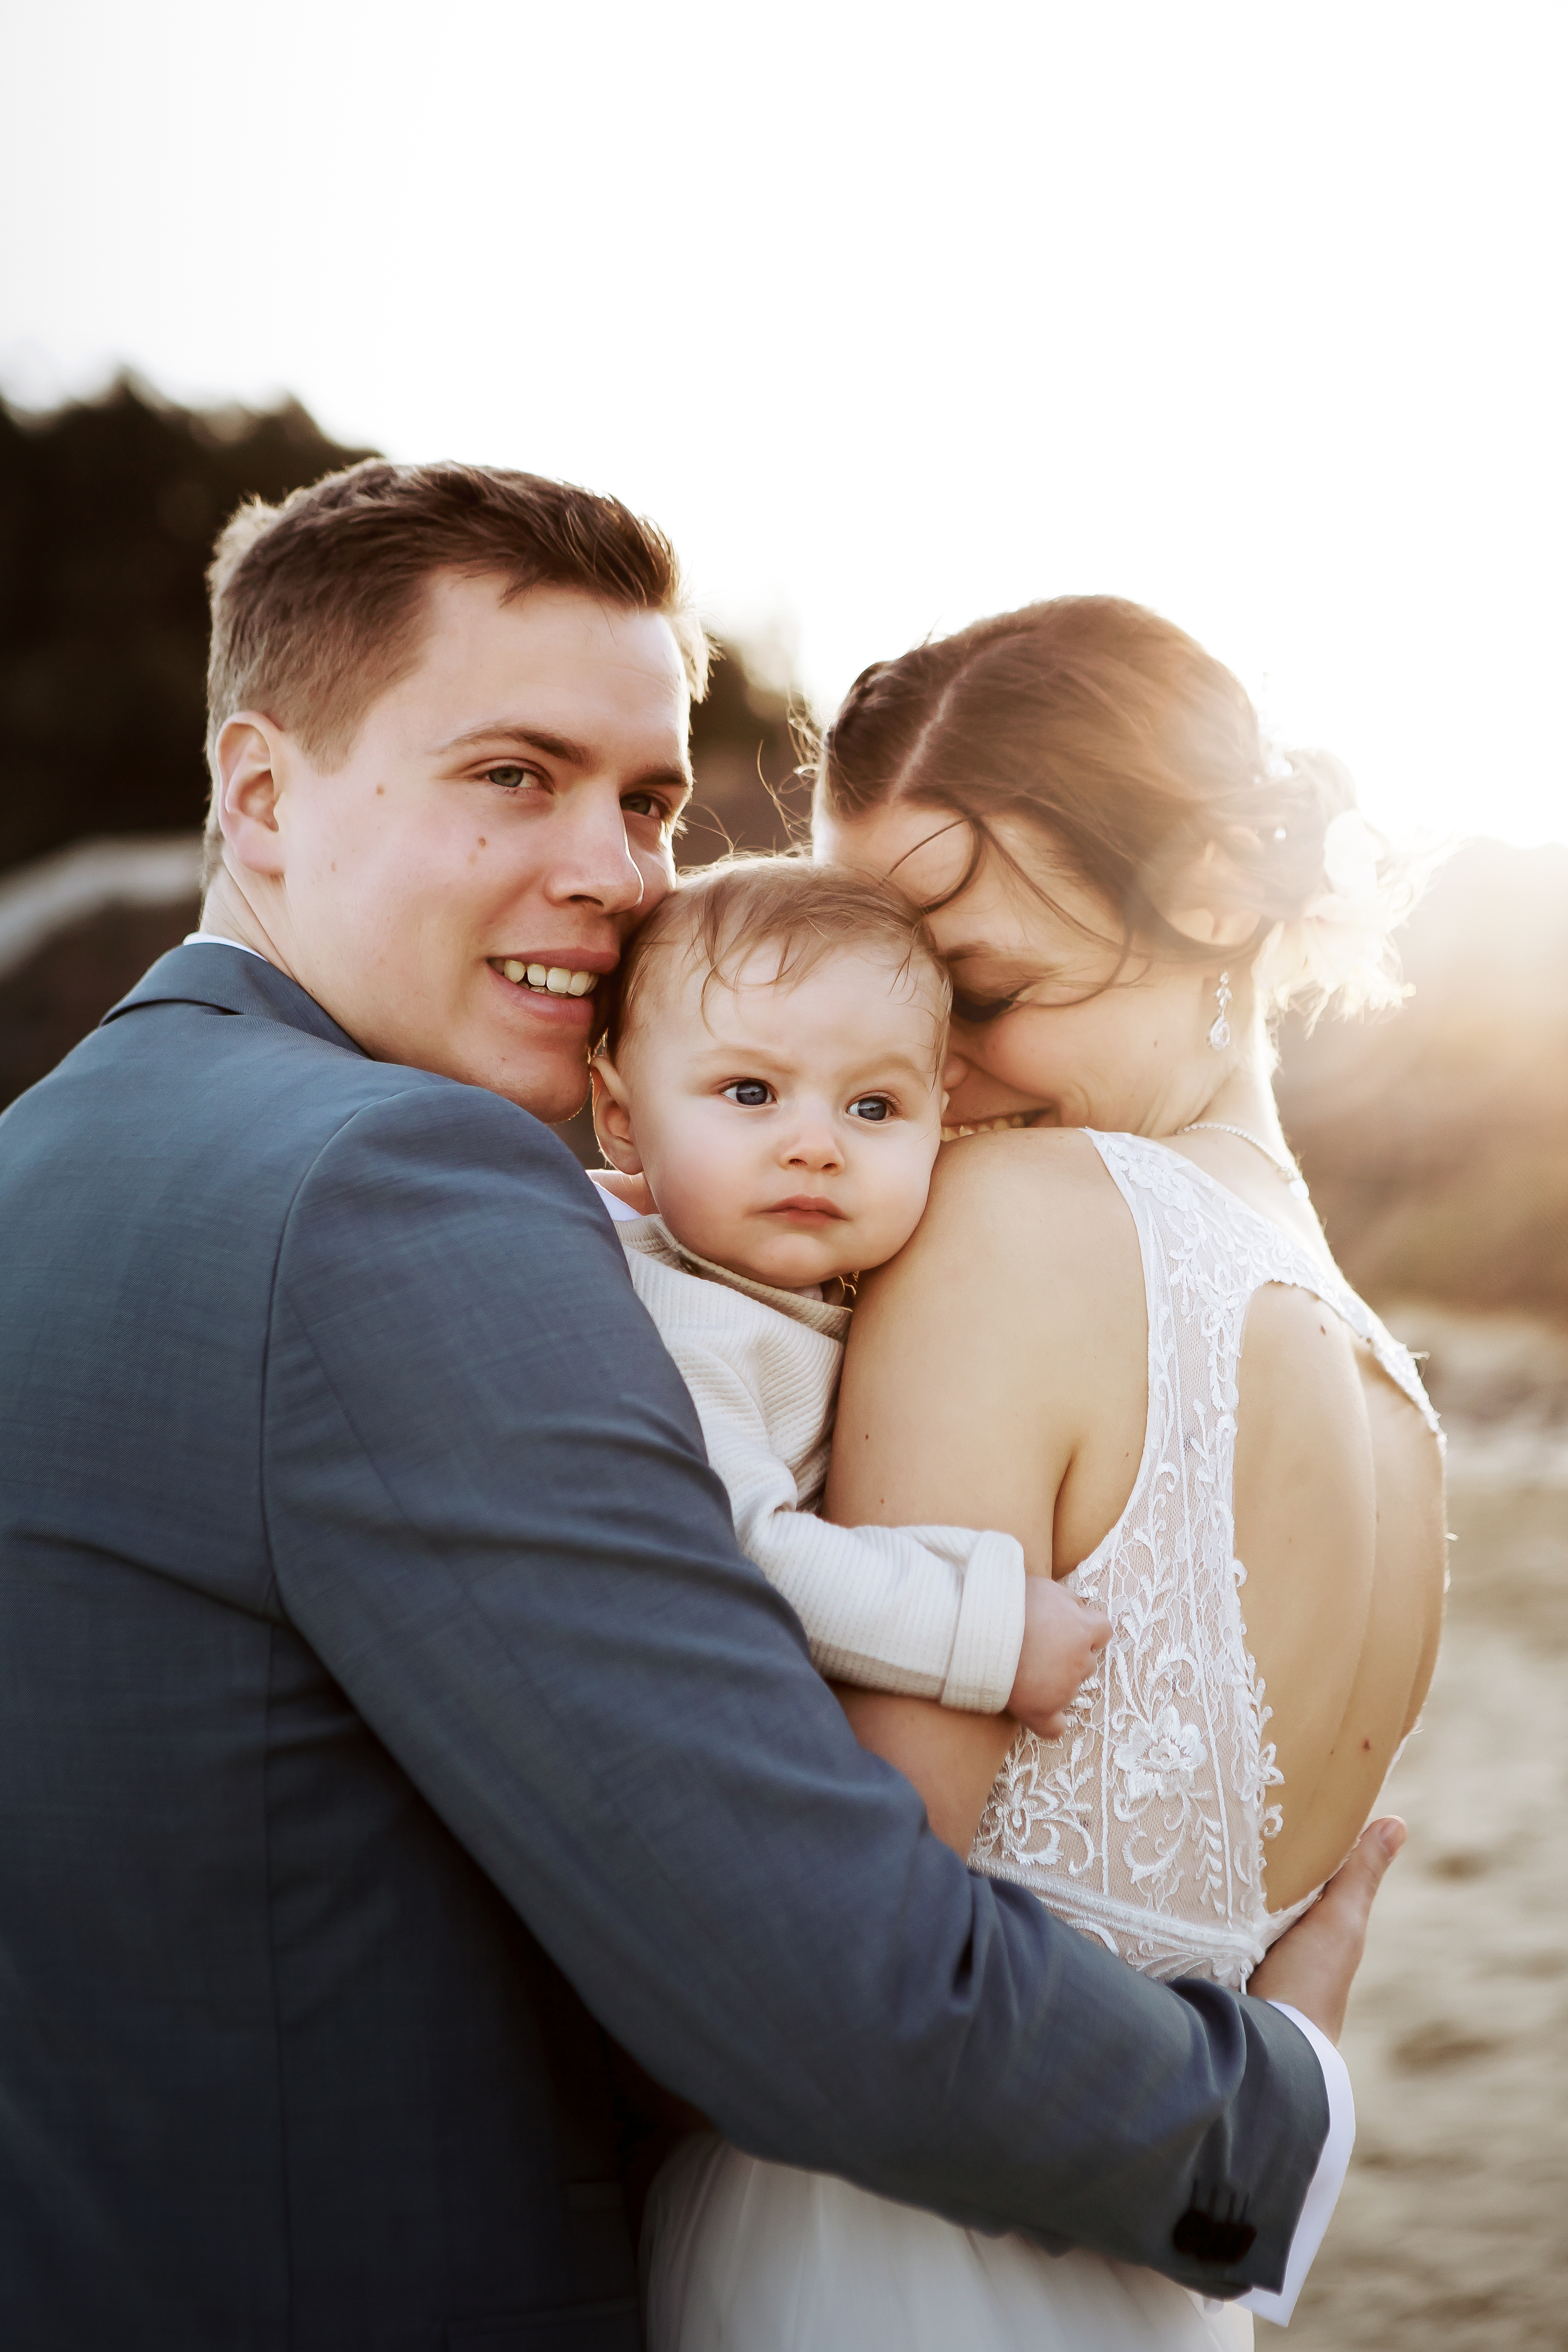 Newlyweds holding they baby on their hands in front of professional wedding photographer's camera